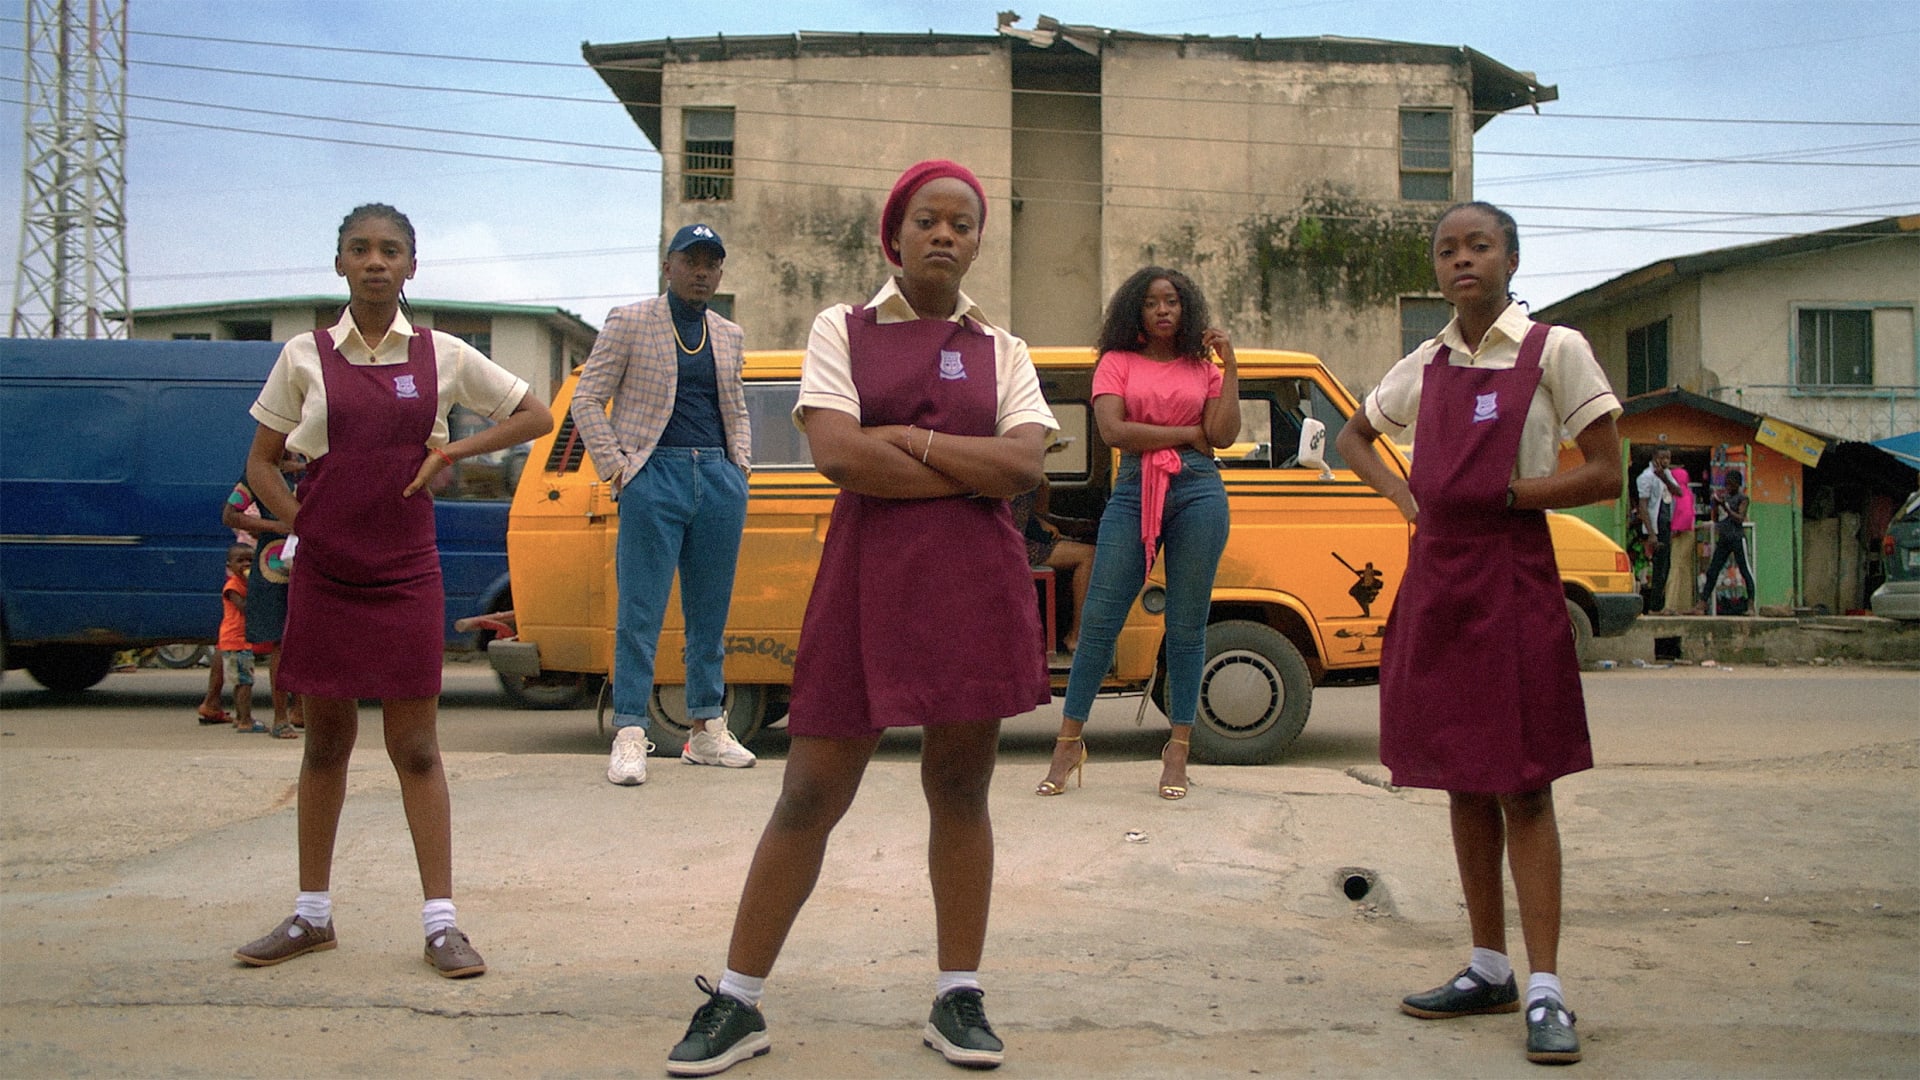 MTV’s revolutionary African show ‘Shuga’ has made a real difference in the fight against HIV